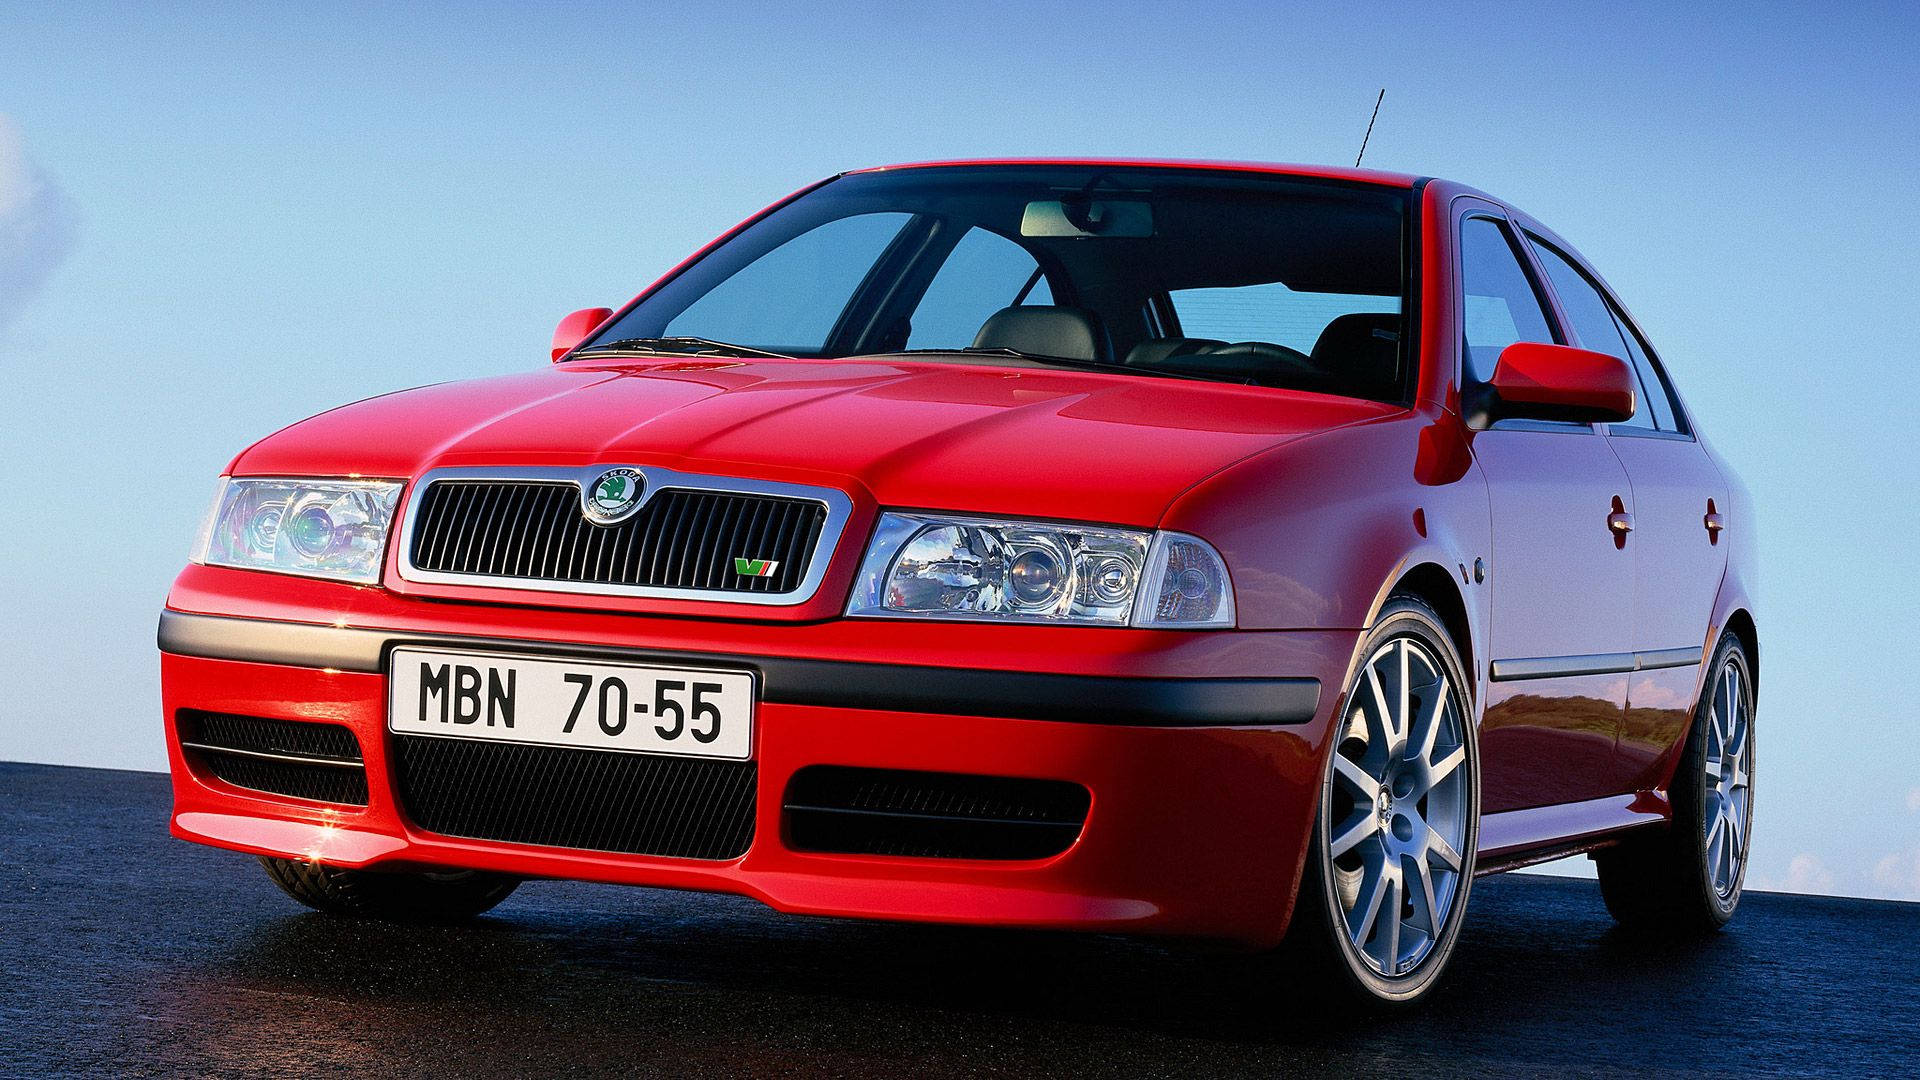 Skoda Octavia RS - the perfect blend of performance and style Wallpaper